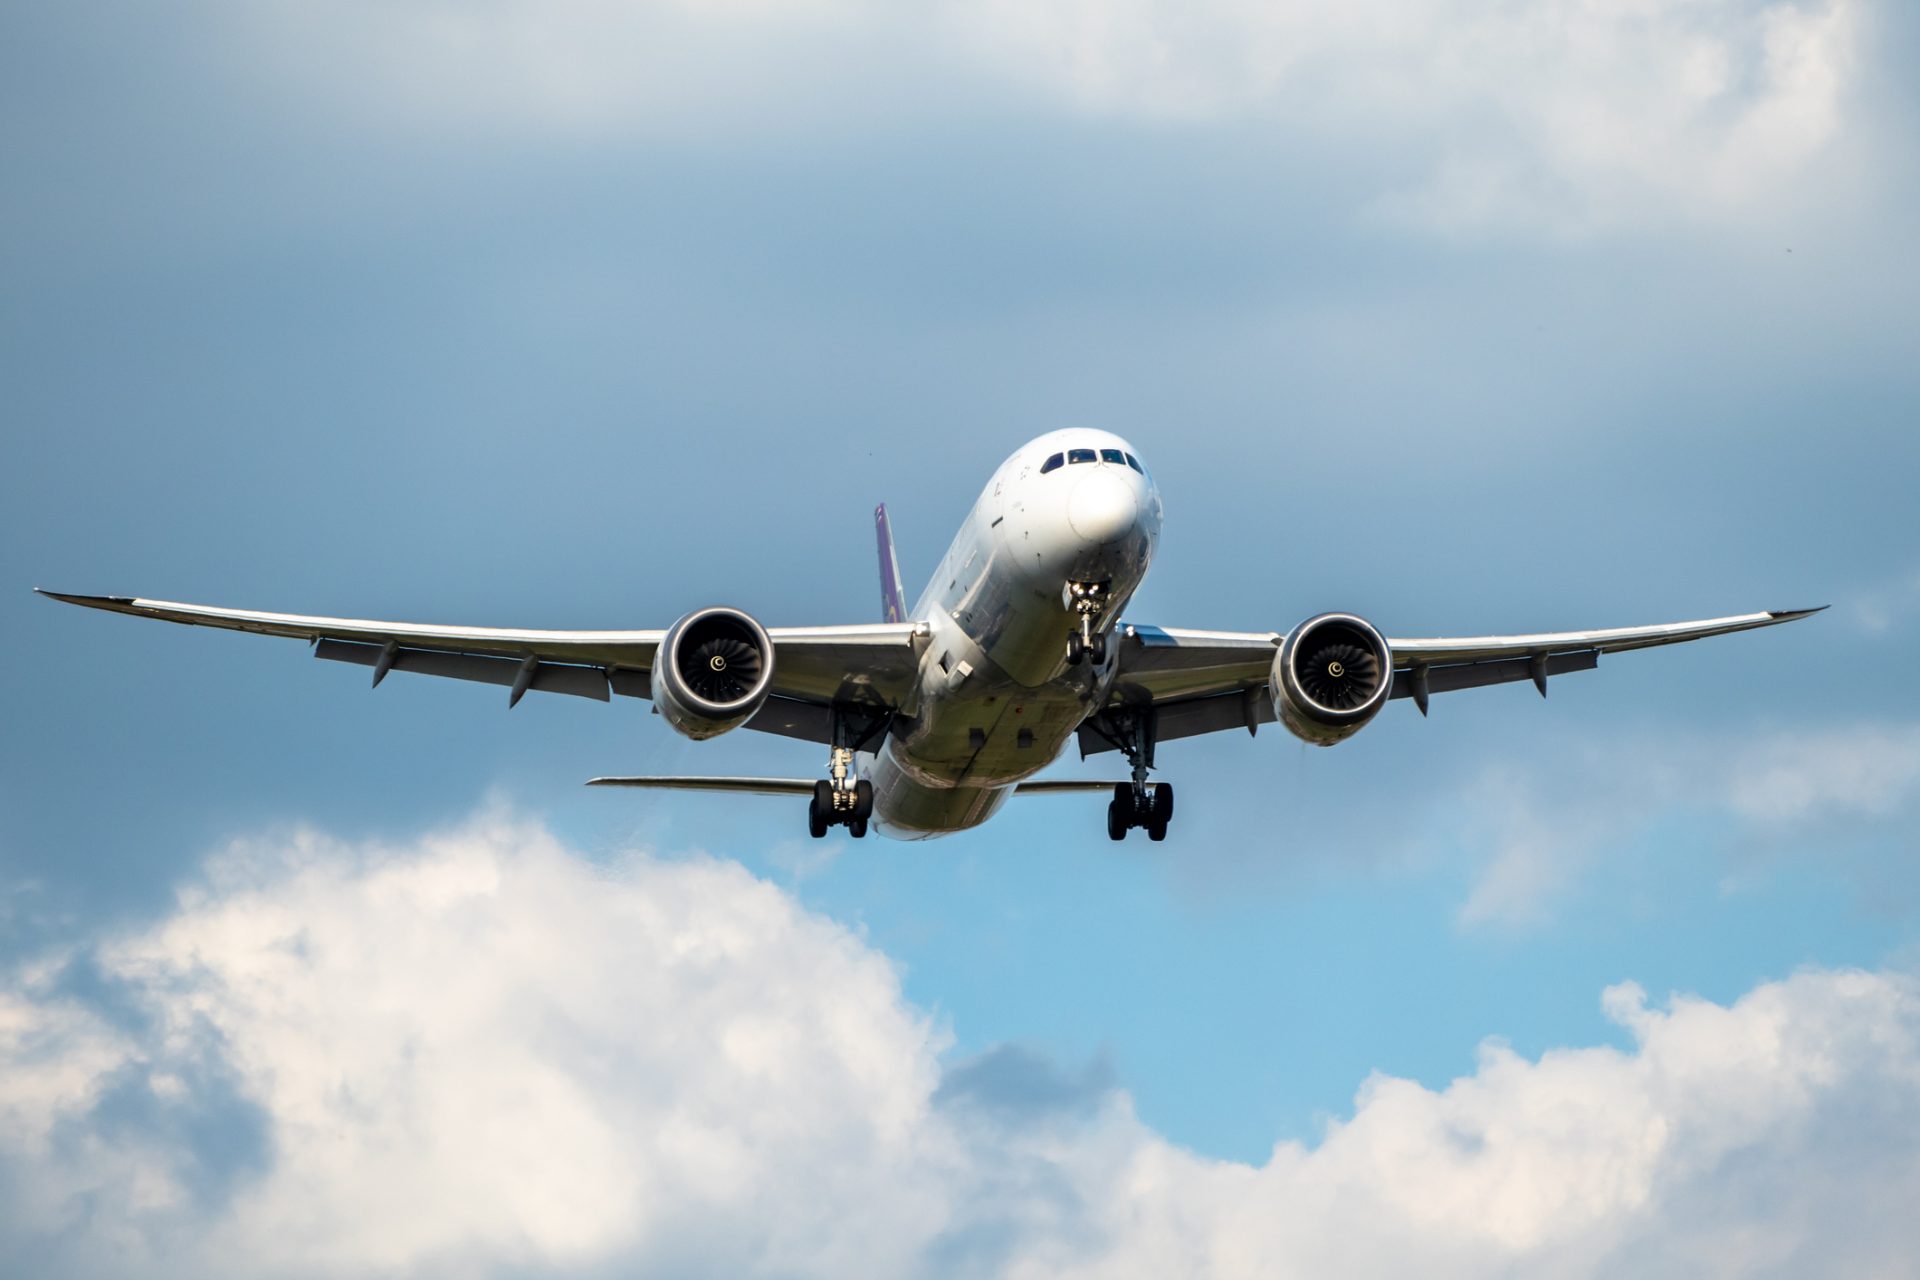 How much do you really know about airplanes?